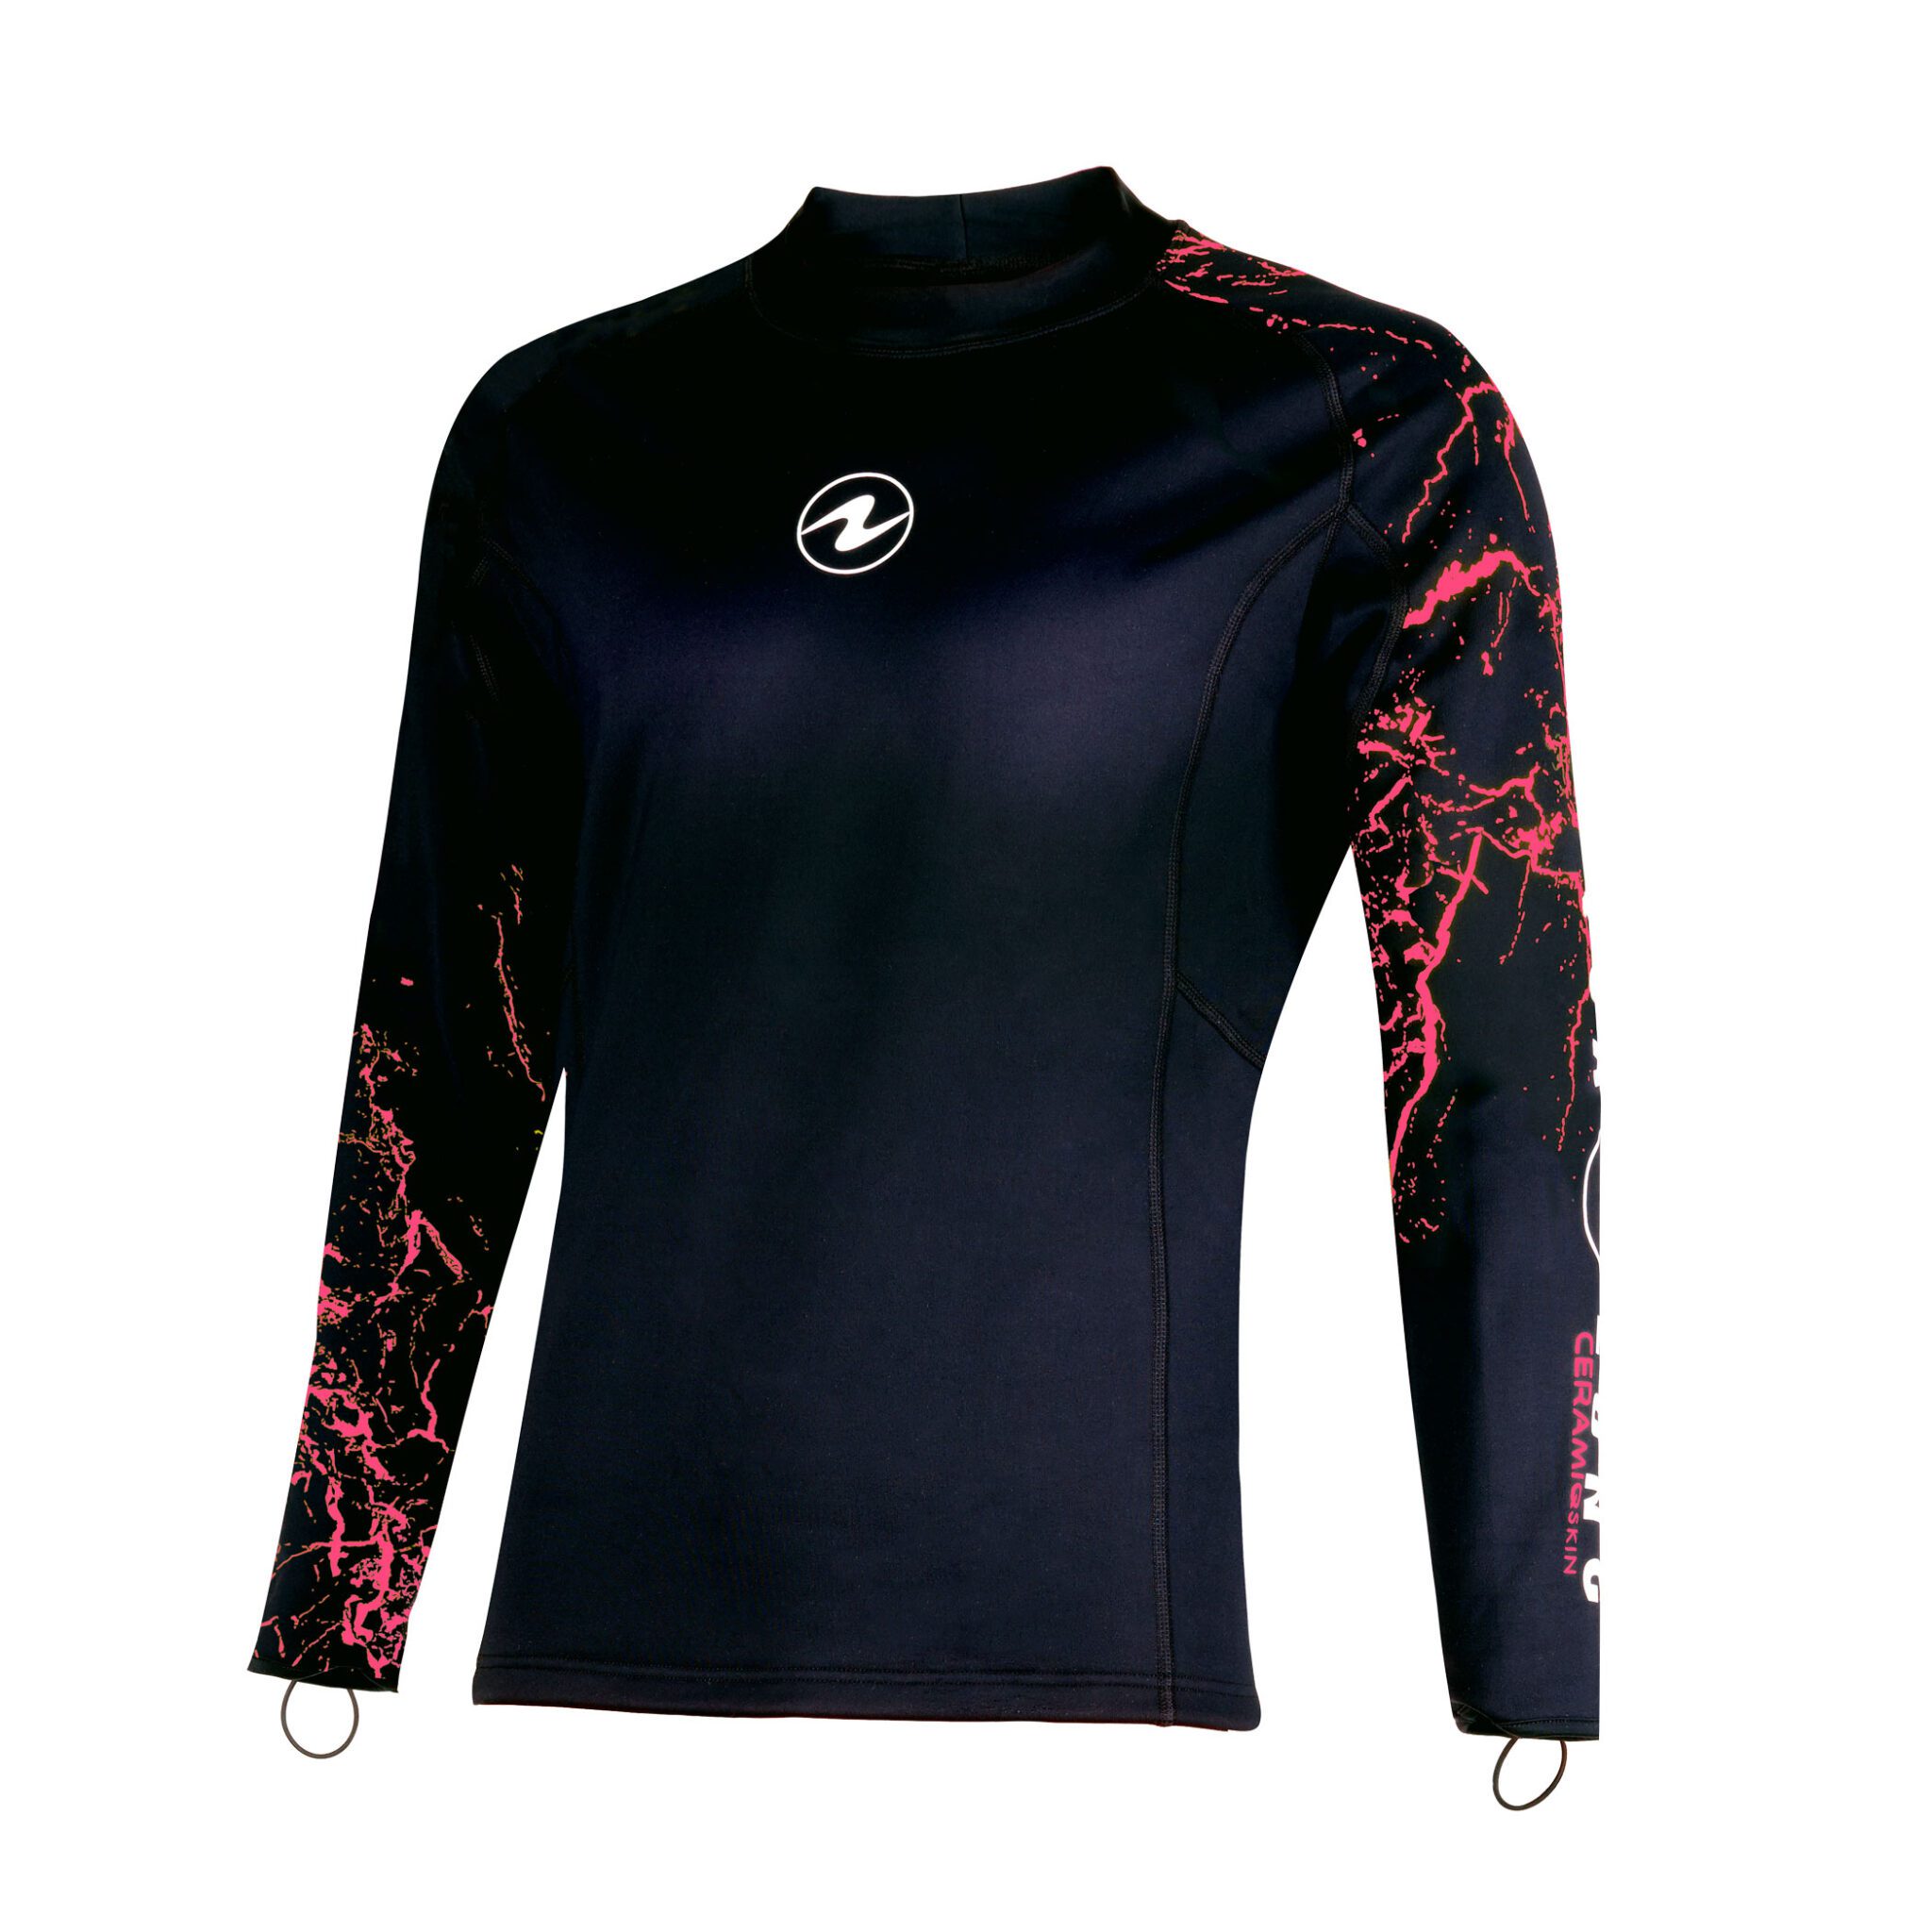 Aqualung Ceramiqskin Women's Long-Sleeve Infrared Thermal Top 